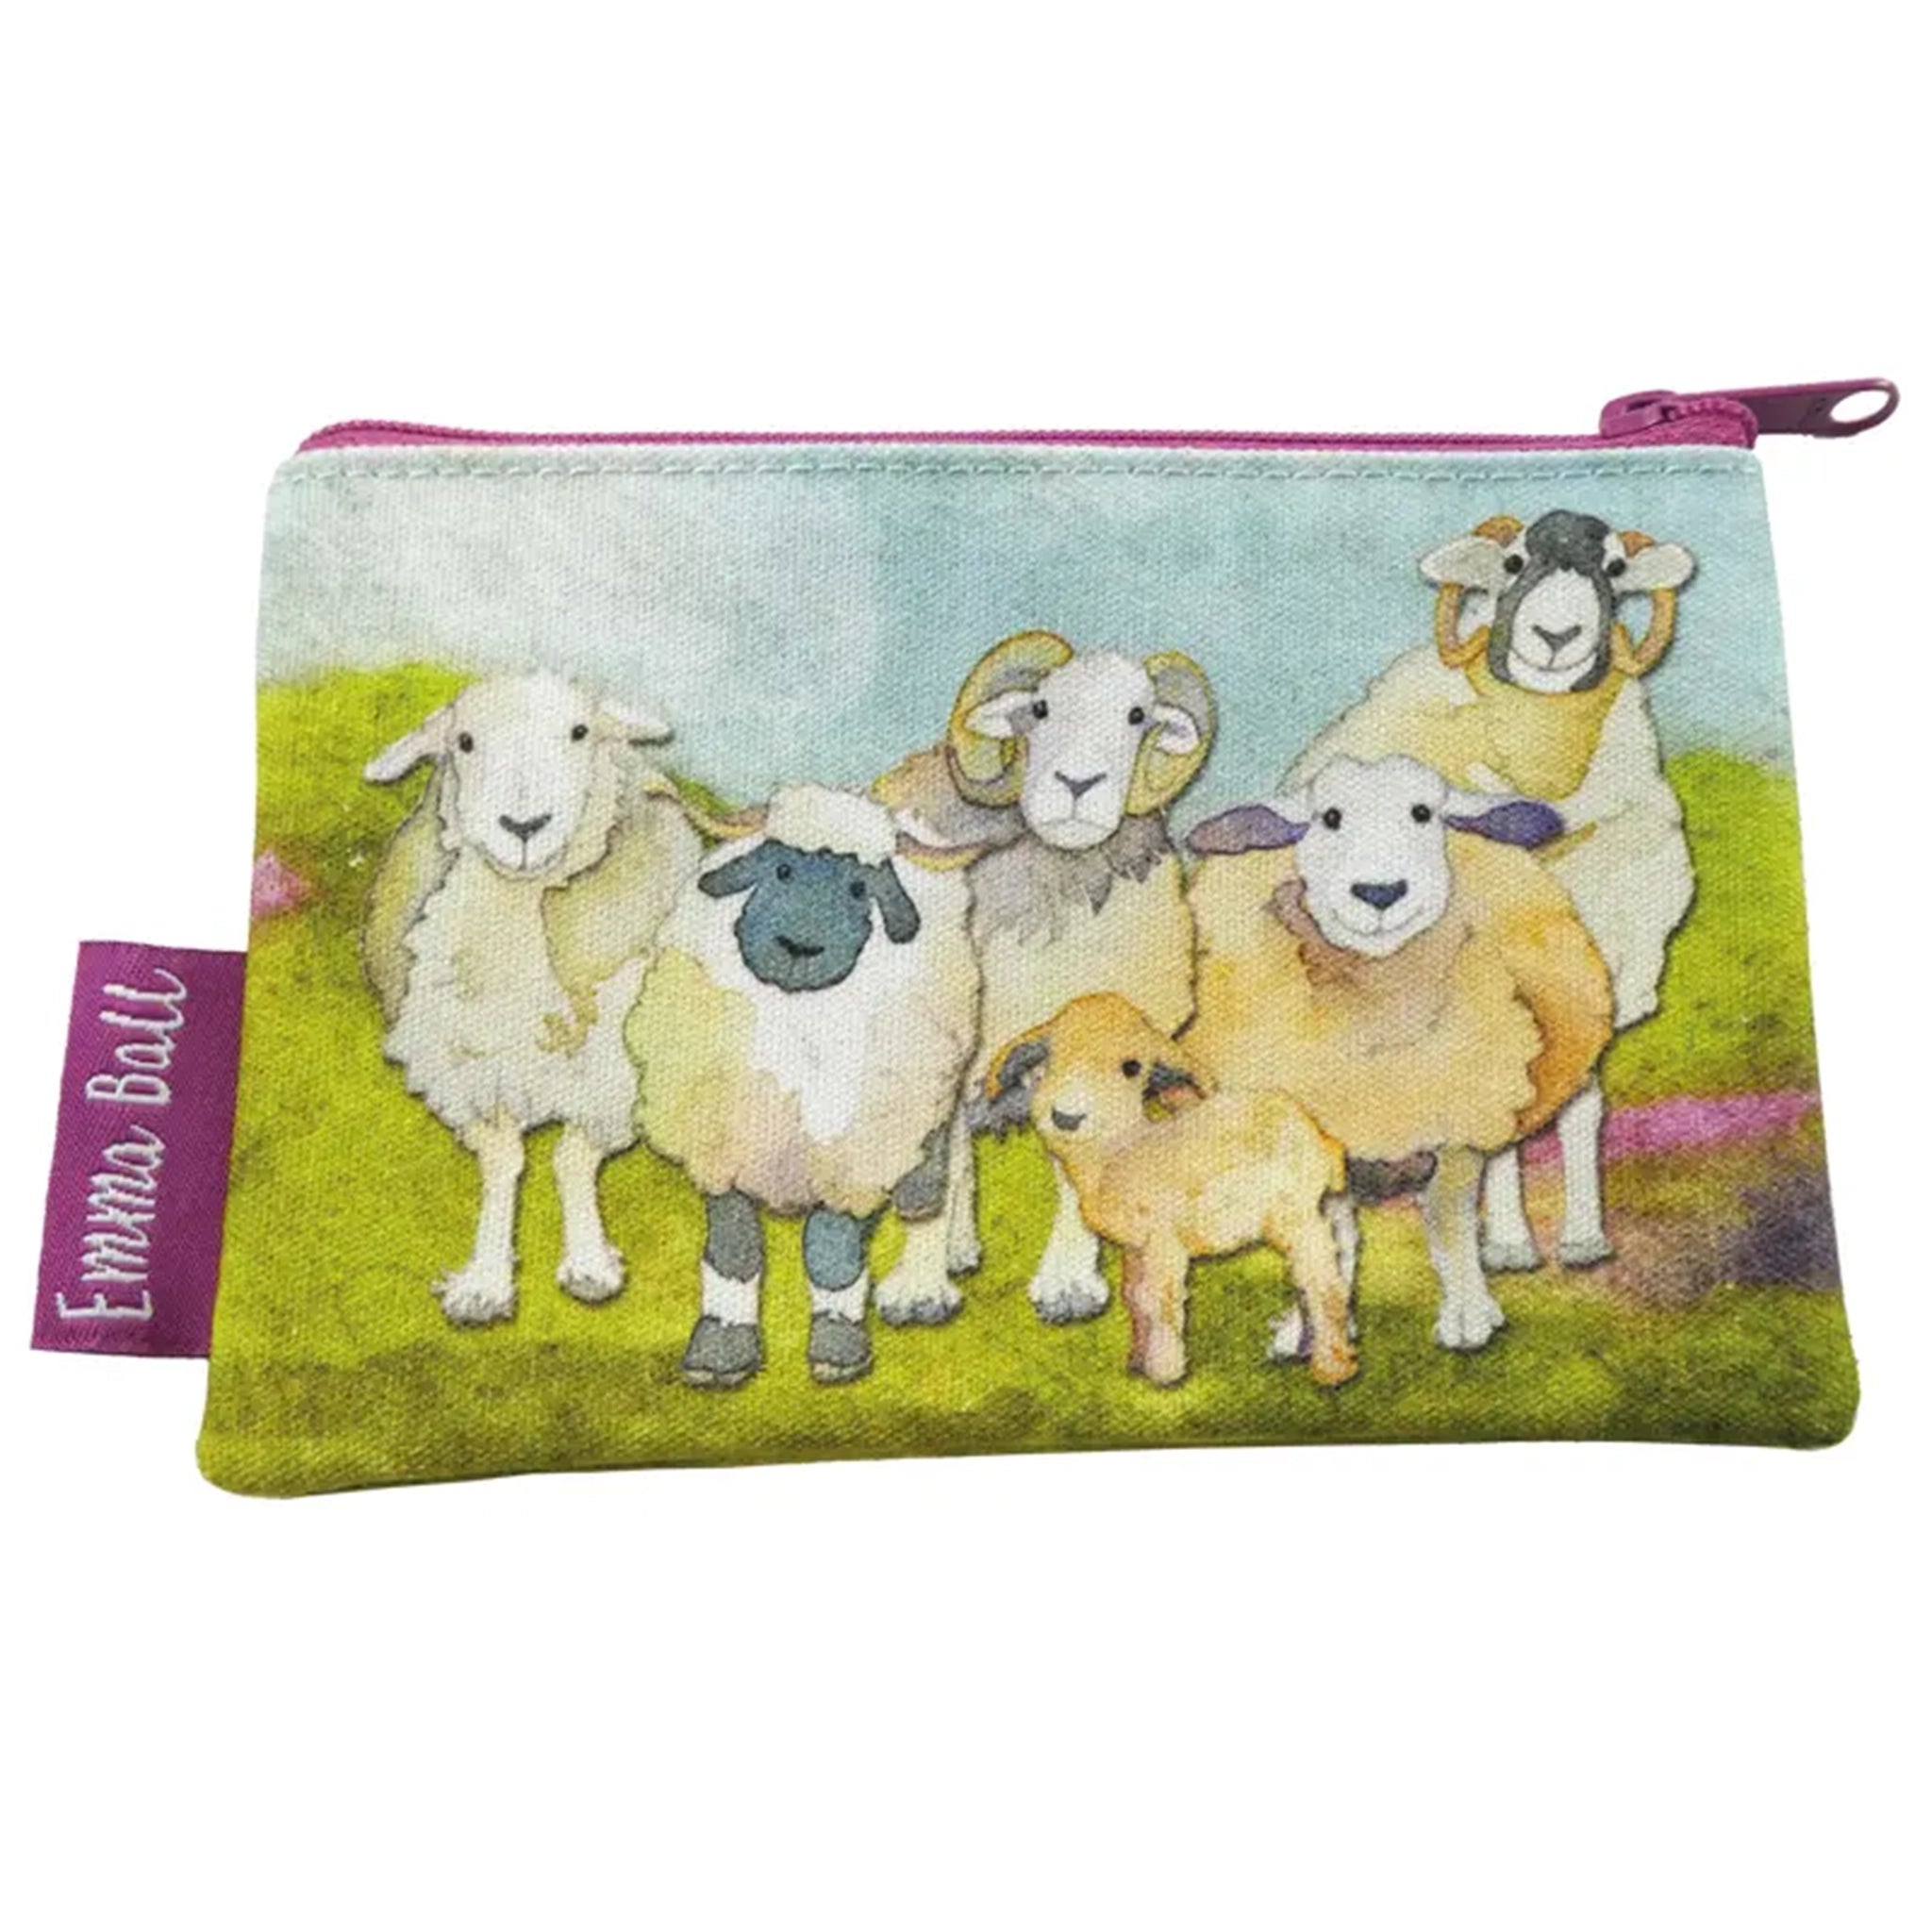 A zip purse with a printed illustration of sheep on a felted style landscape 